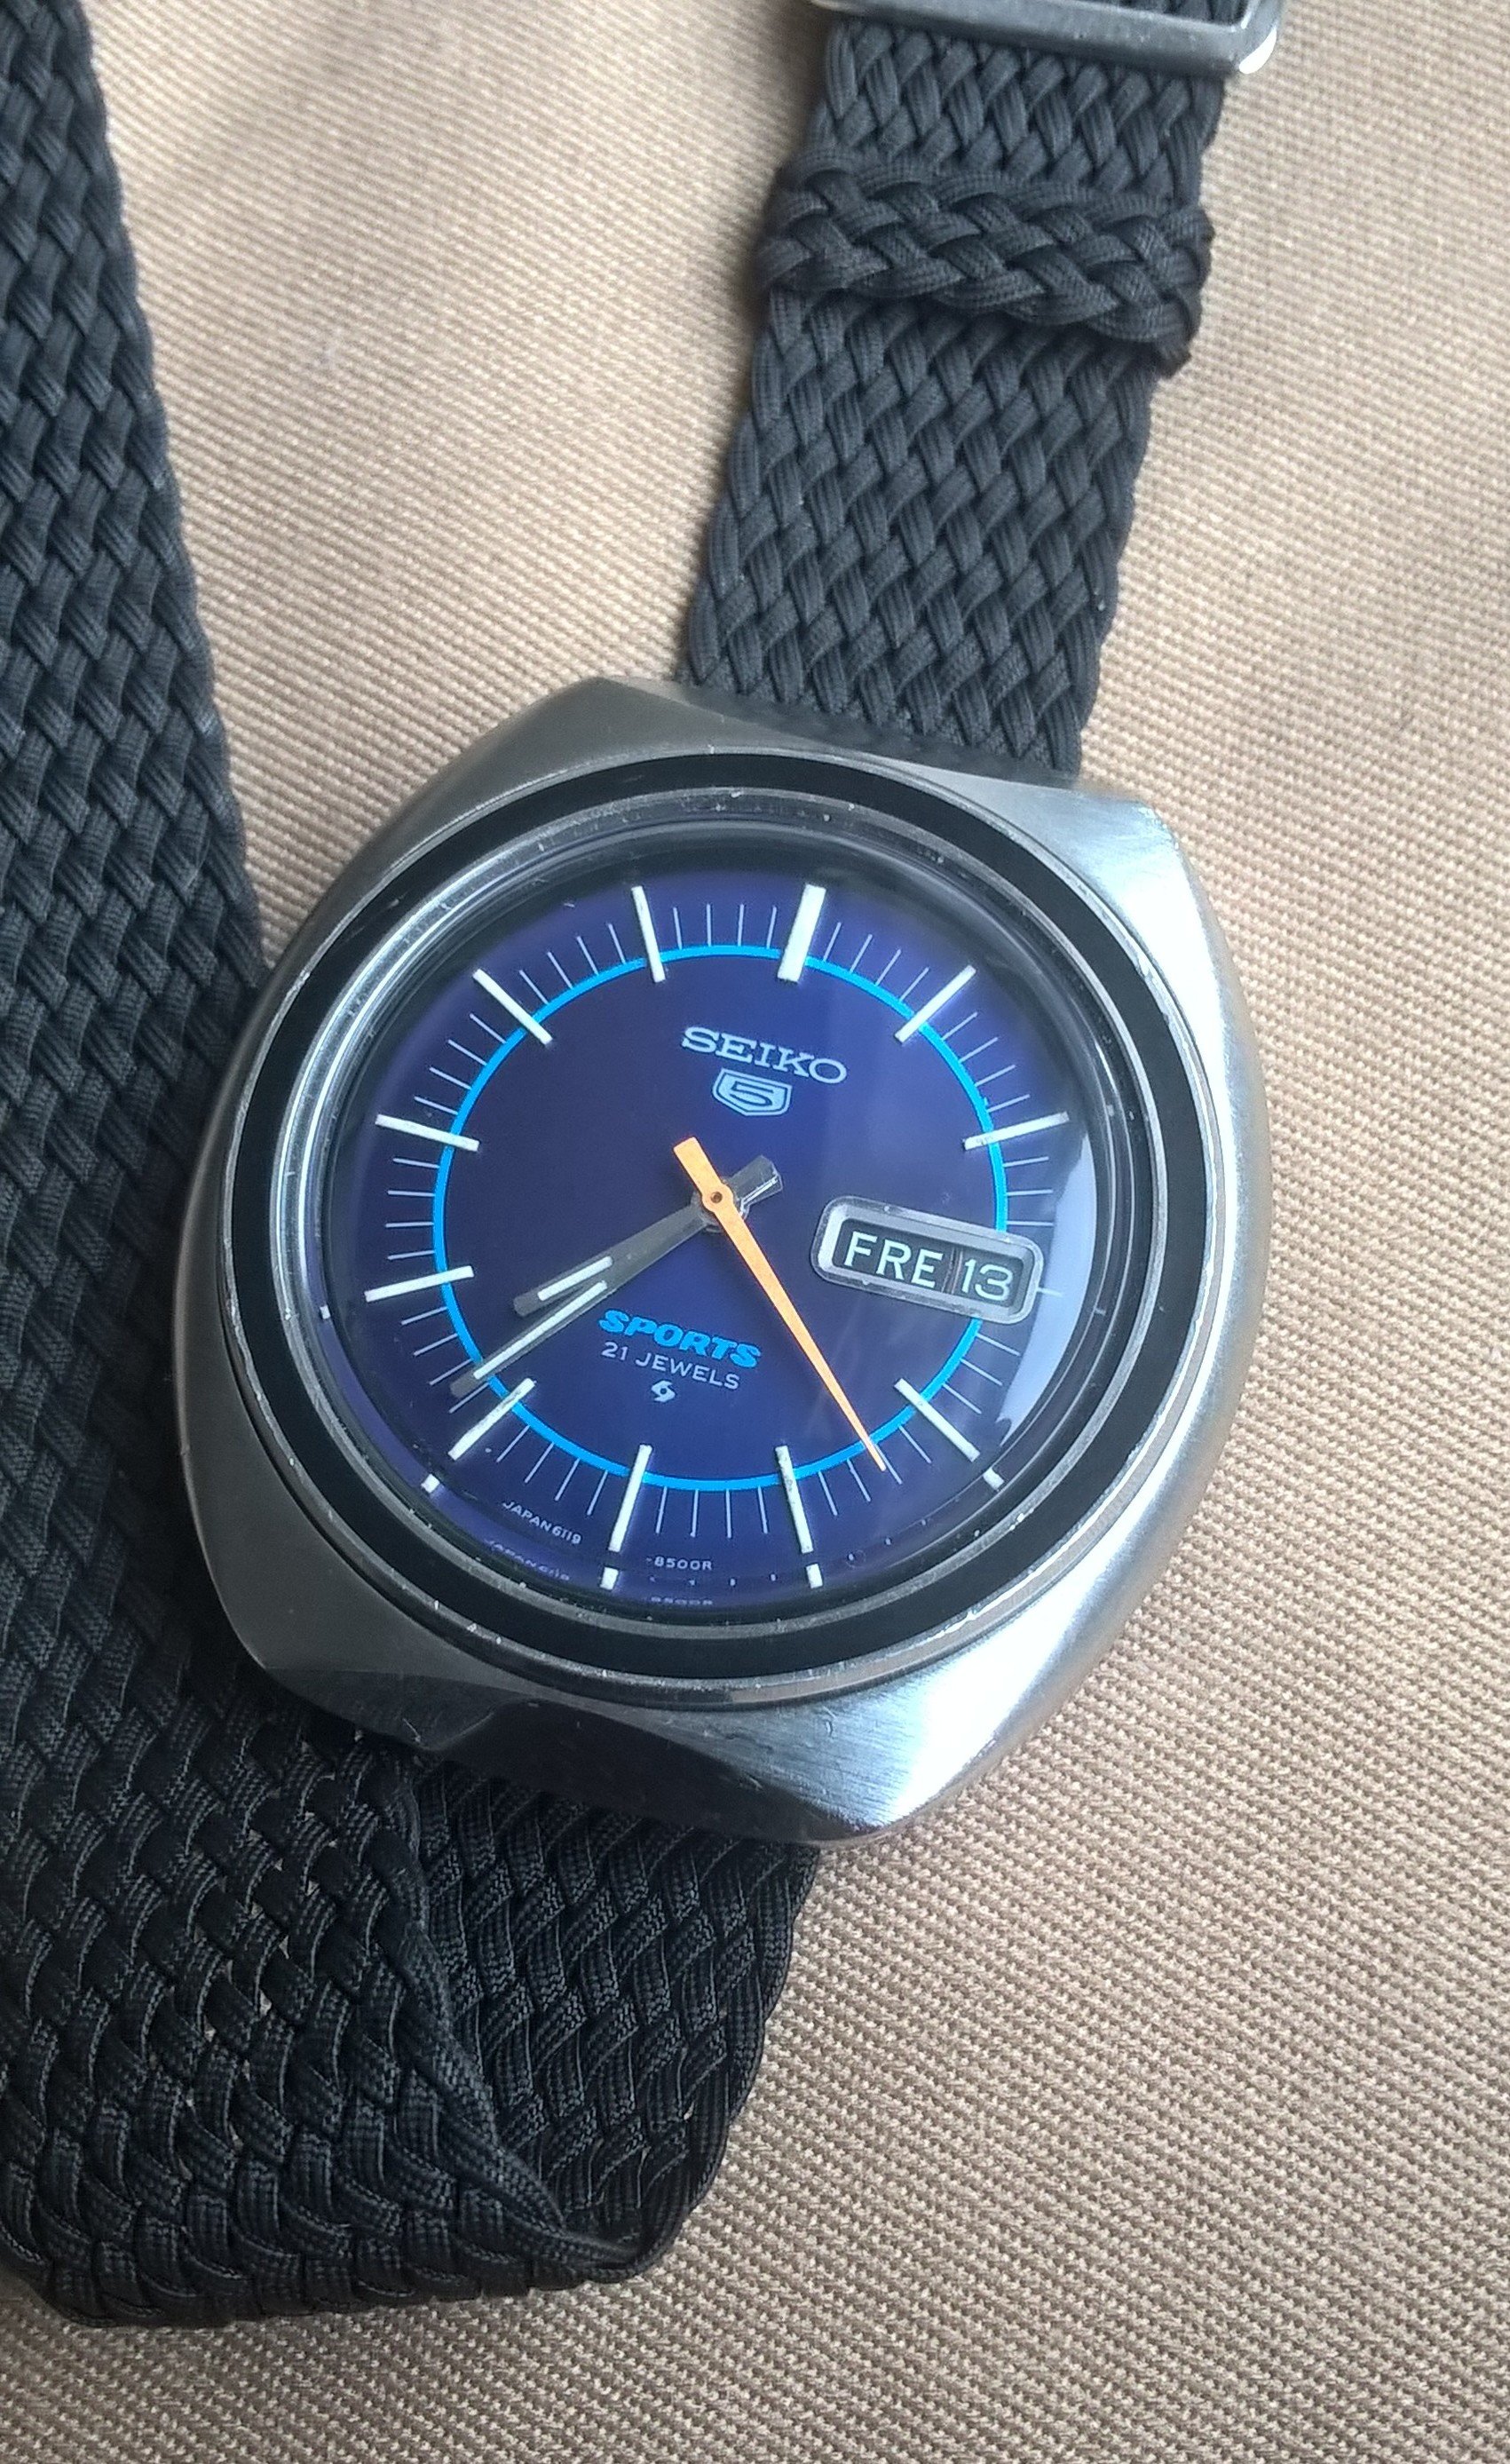 SOLD: Seiko 5 Sports 6119-8450 €100 | The Watch Site